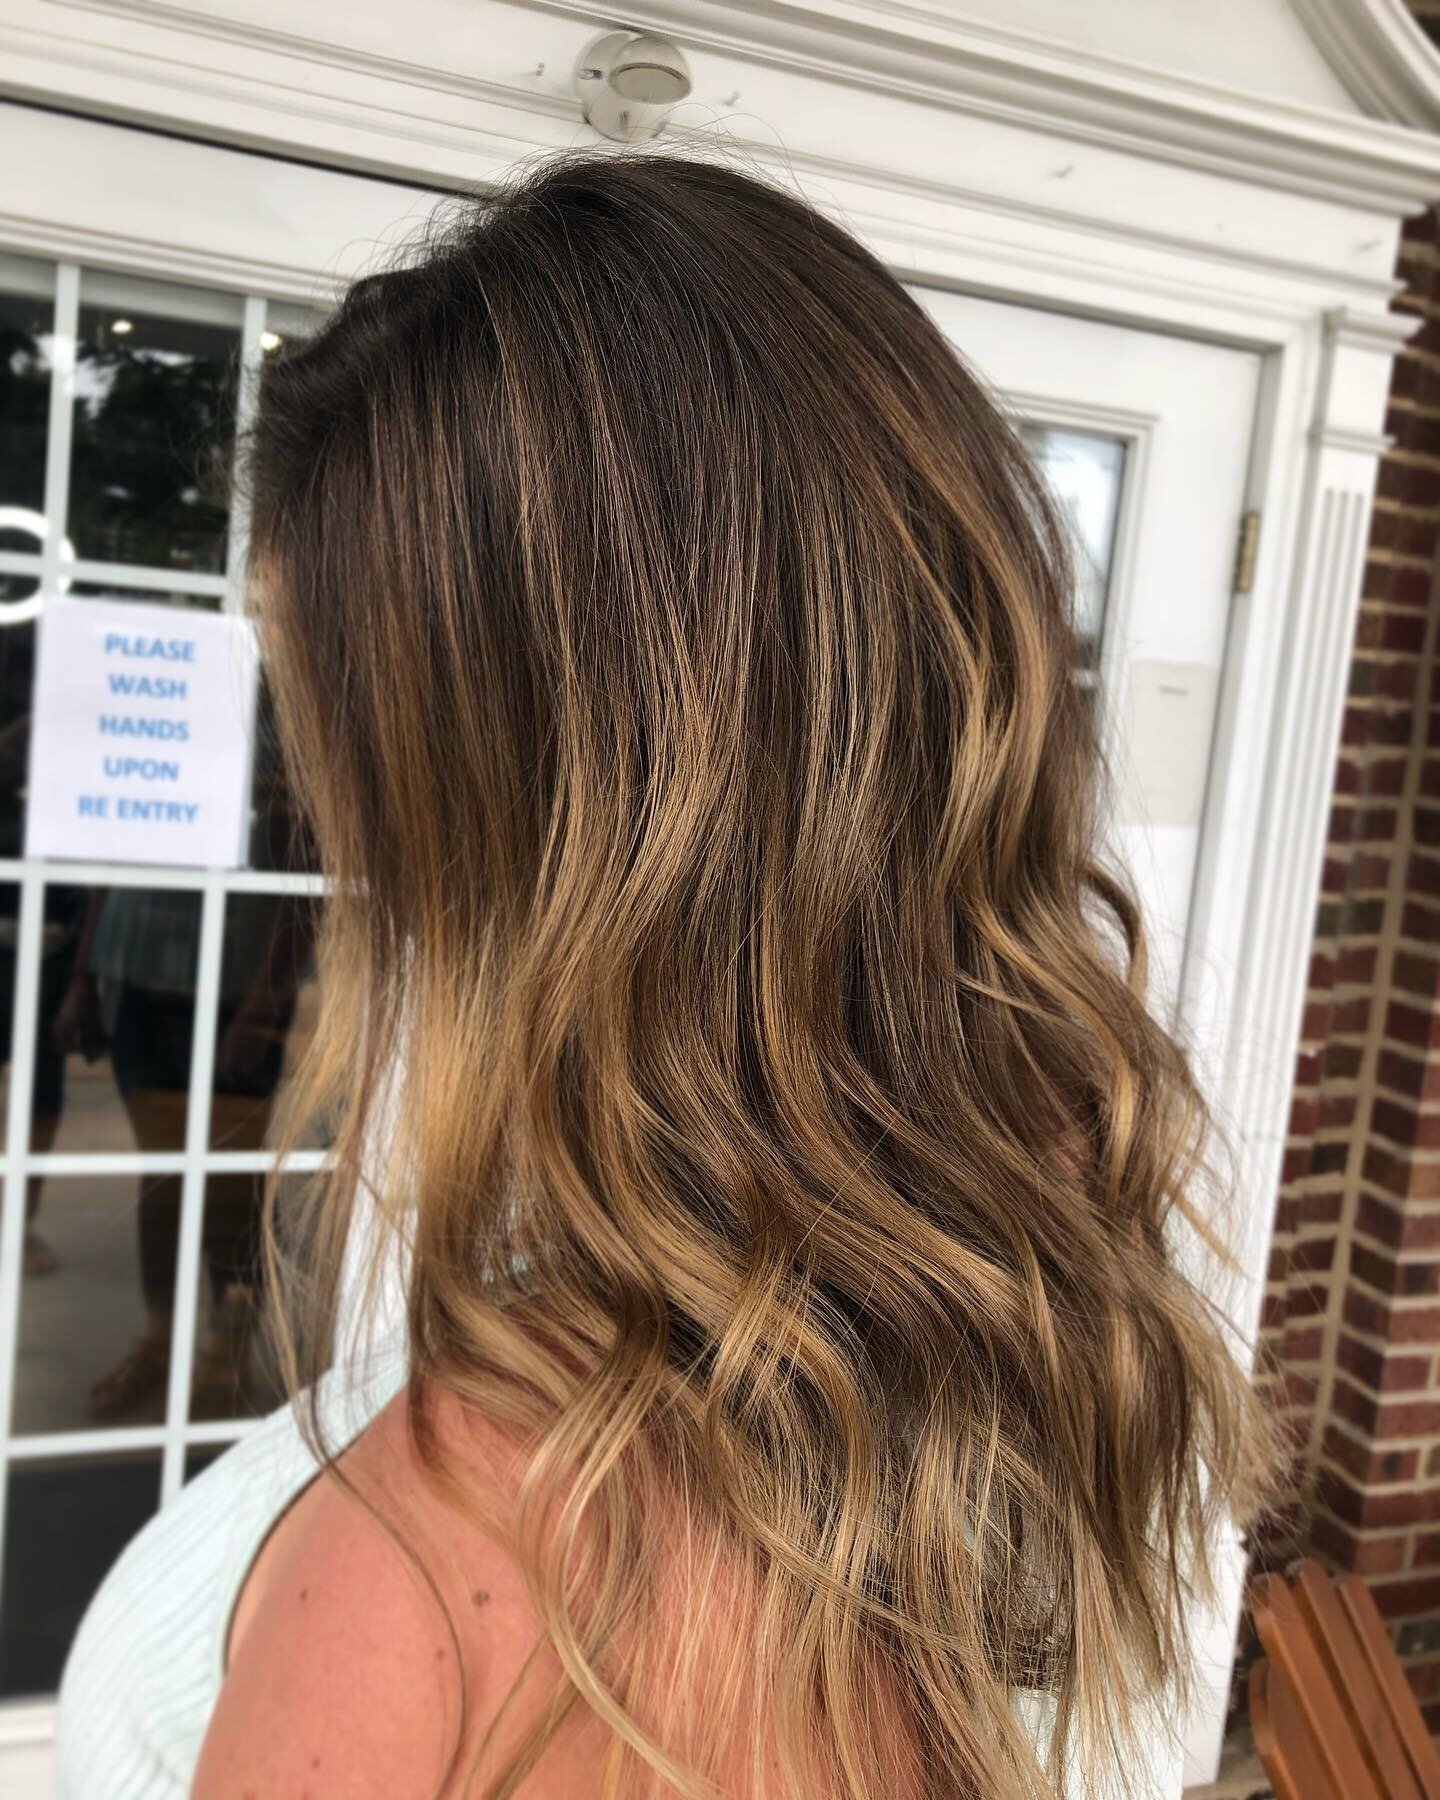 Who&rsquo;s ready for perfect fall hair?!🍂
#balayage #stlblvd #blvdstl